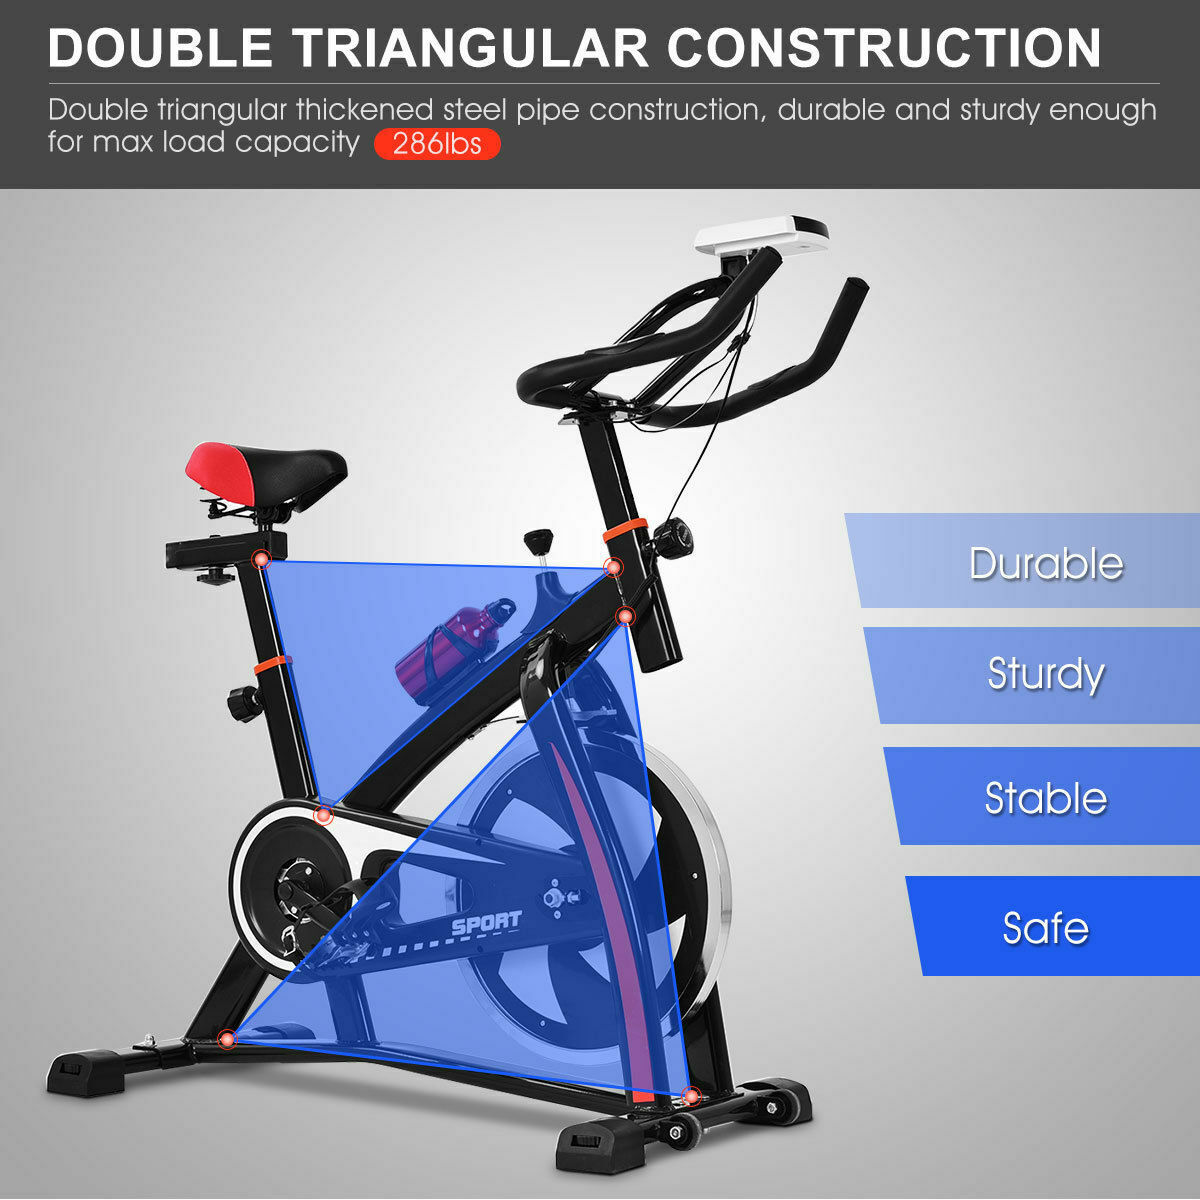 Costway Exercise Bicycle Indoor Bike Cycling Cardio Adjustable Gym Workout Fitness Home - image 4 of 9